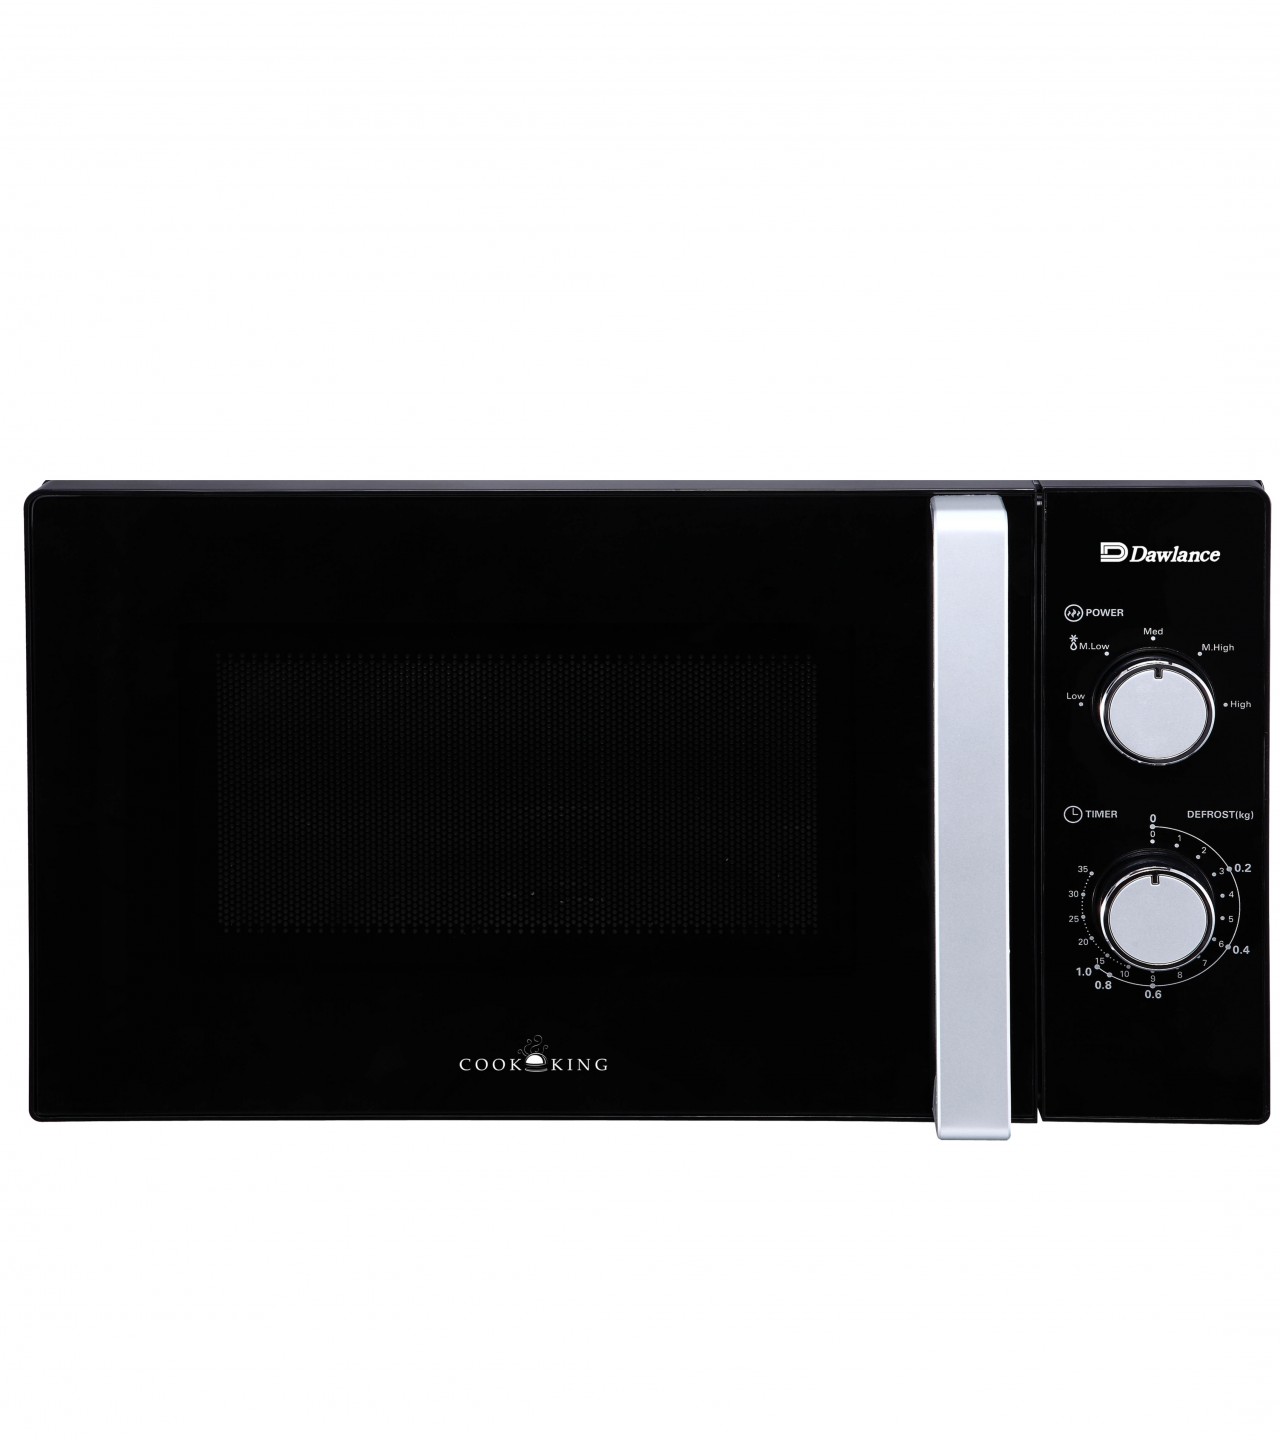 Dawlance DW-MD10 Classic Series Microwave Oven